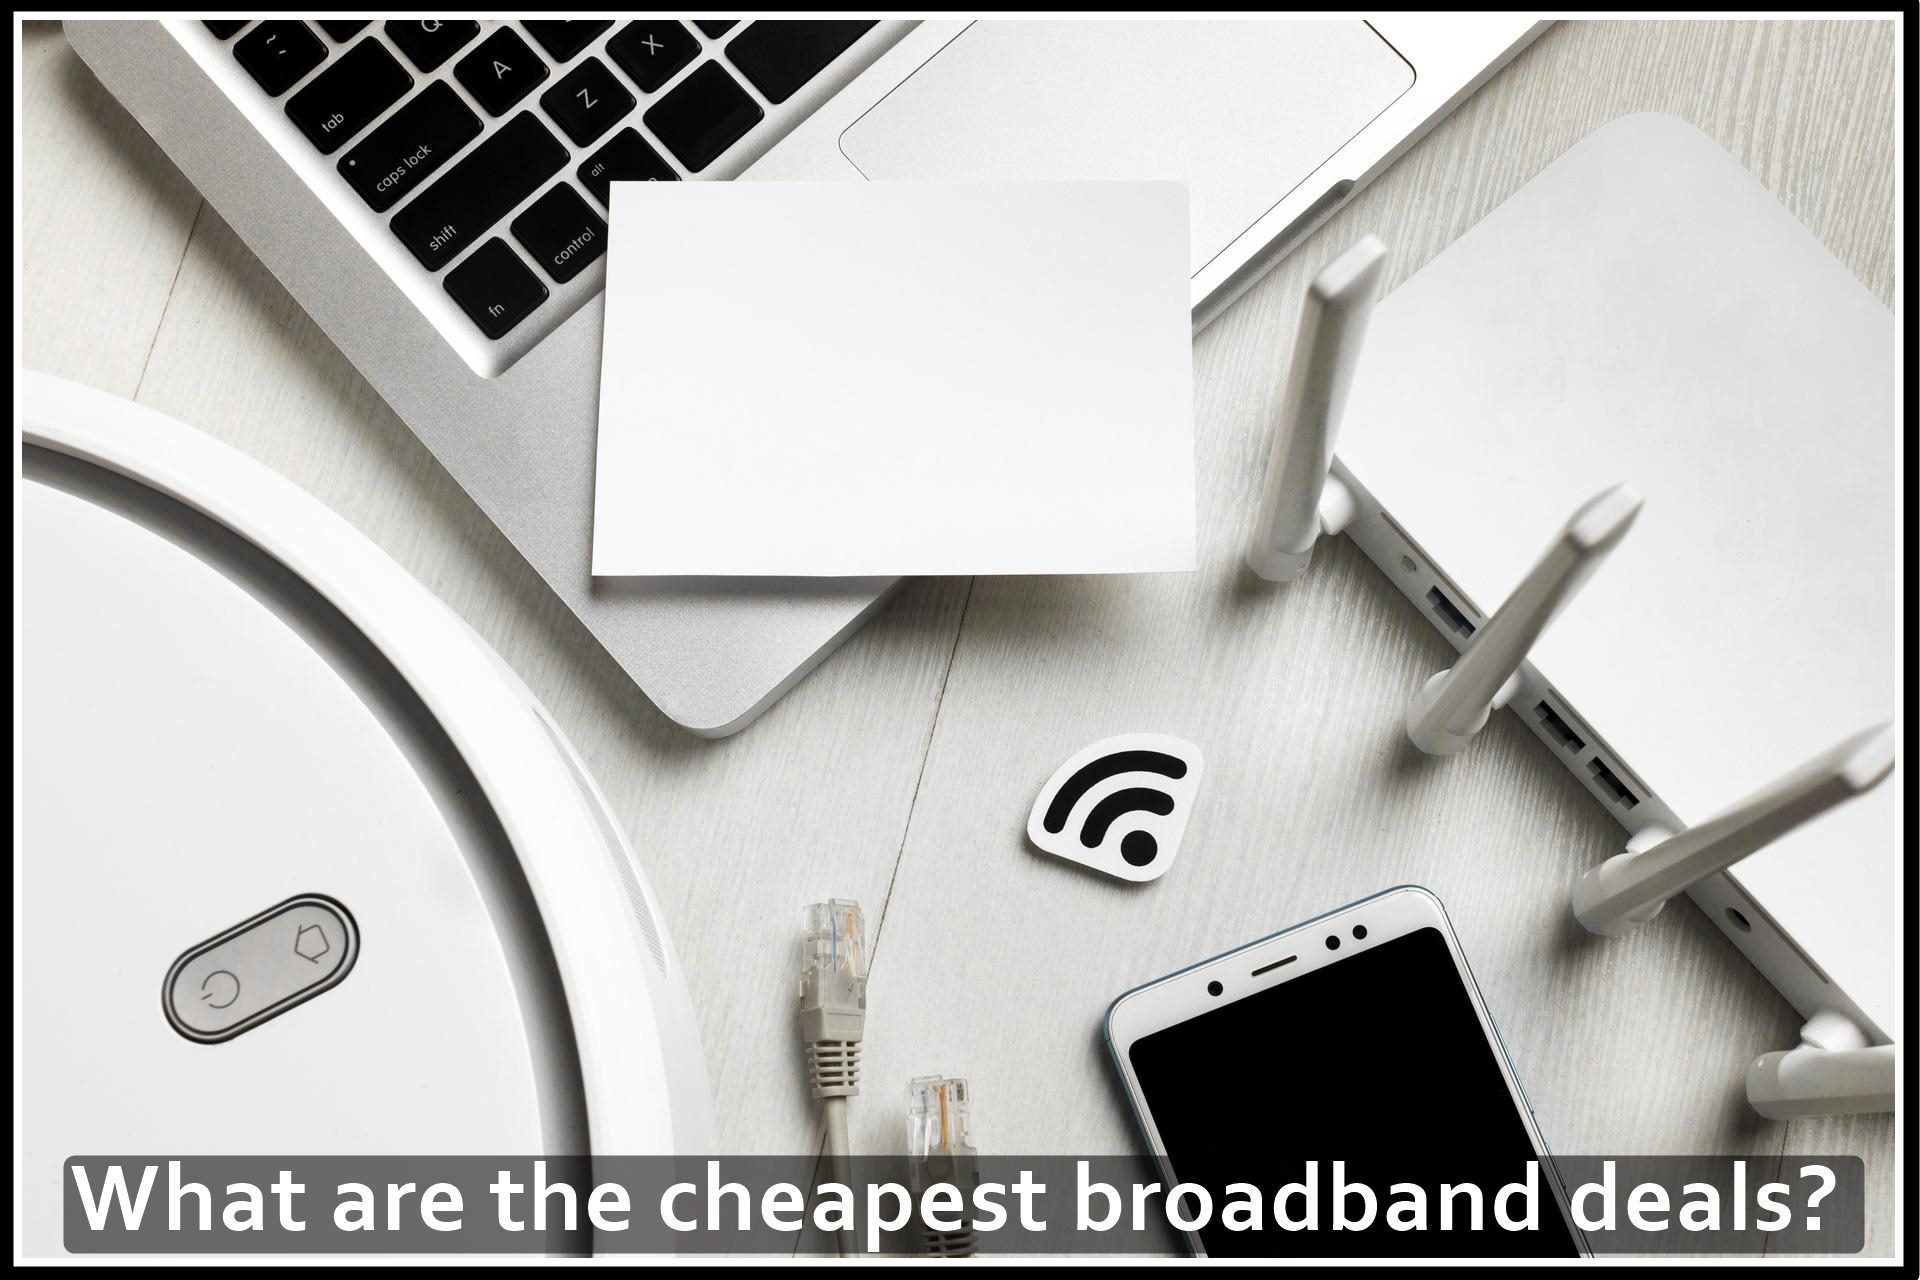 What are the cheapest broadband deals?